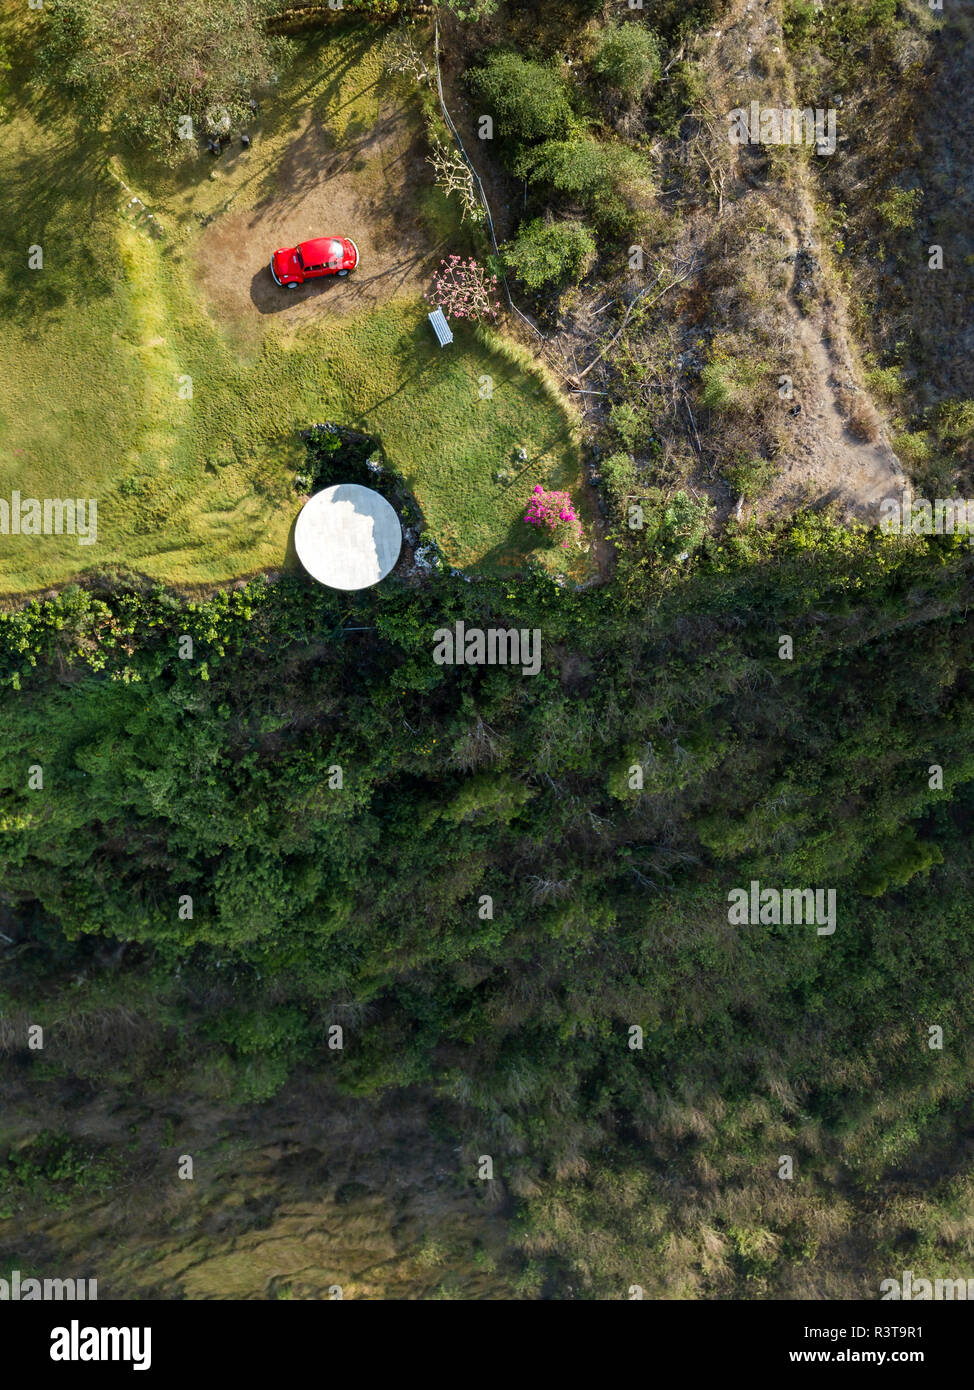 Indonesia, Bali, Aerial view of Nyang Nyang beach, VW beetle and observation point Stock Photo